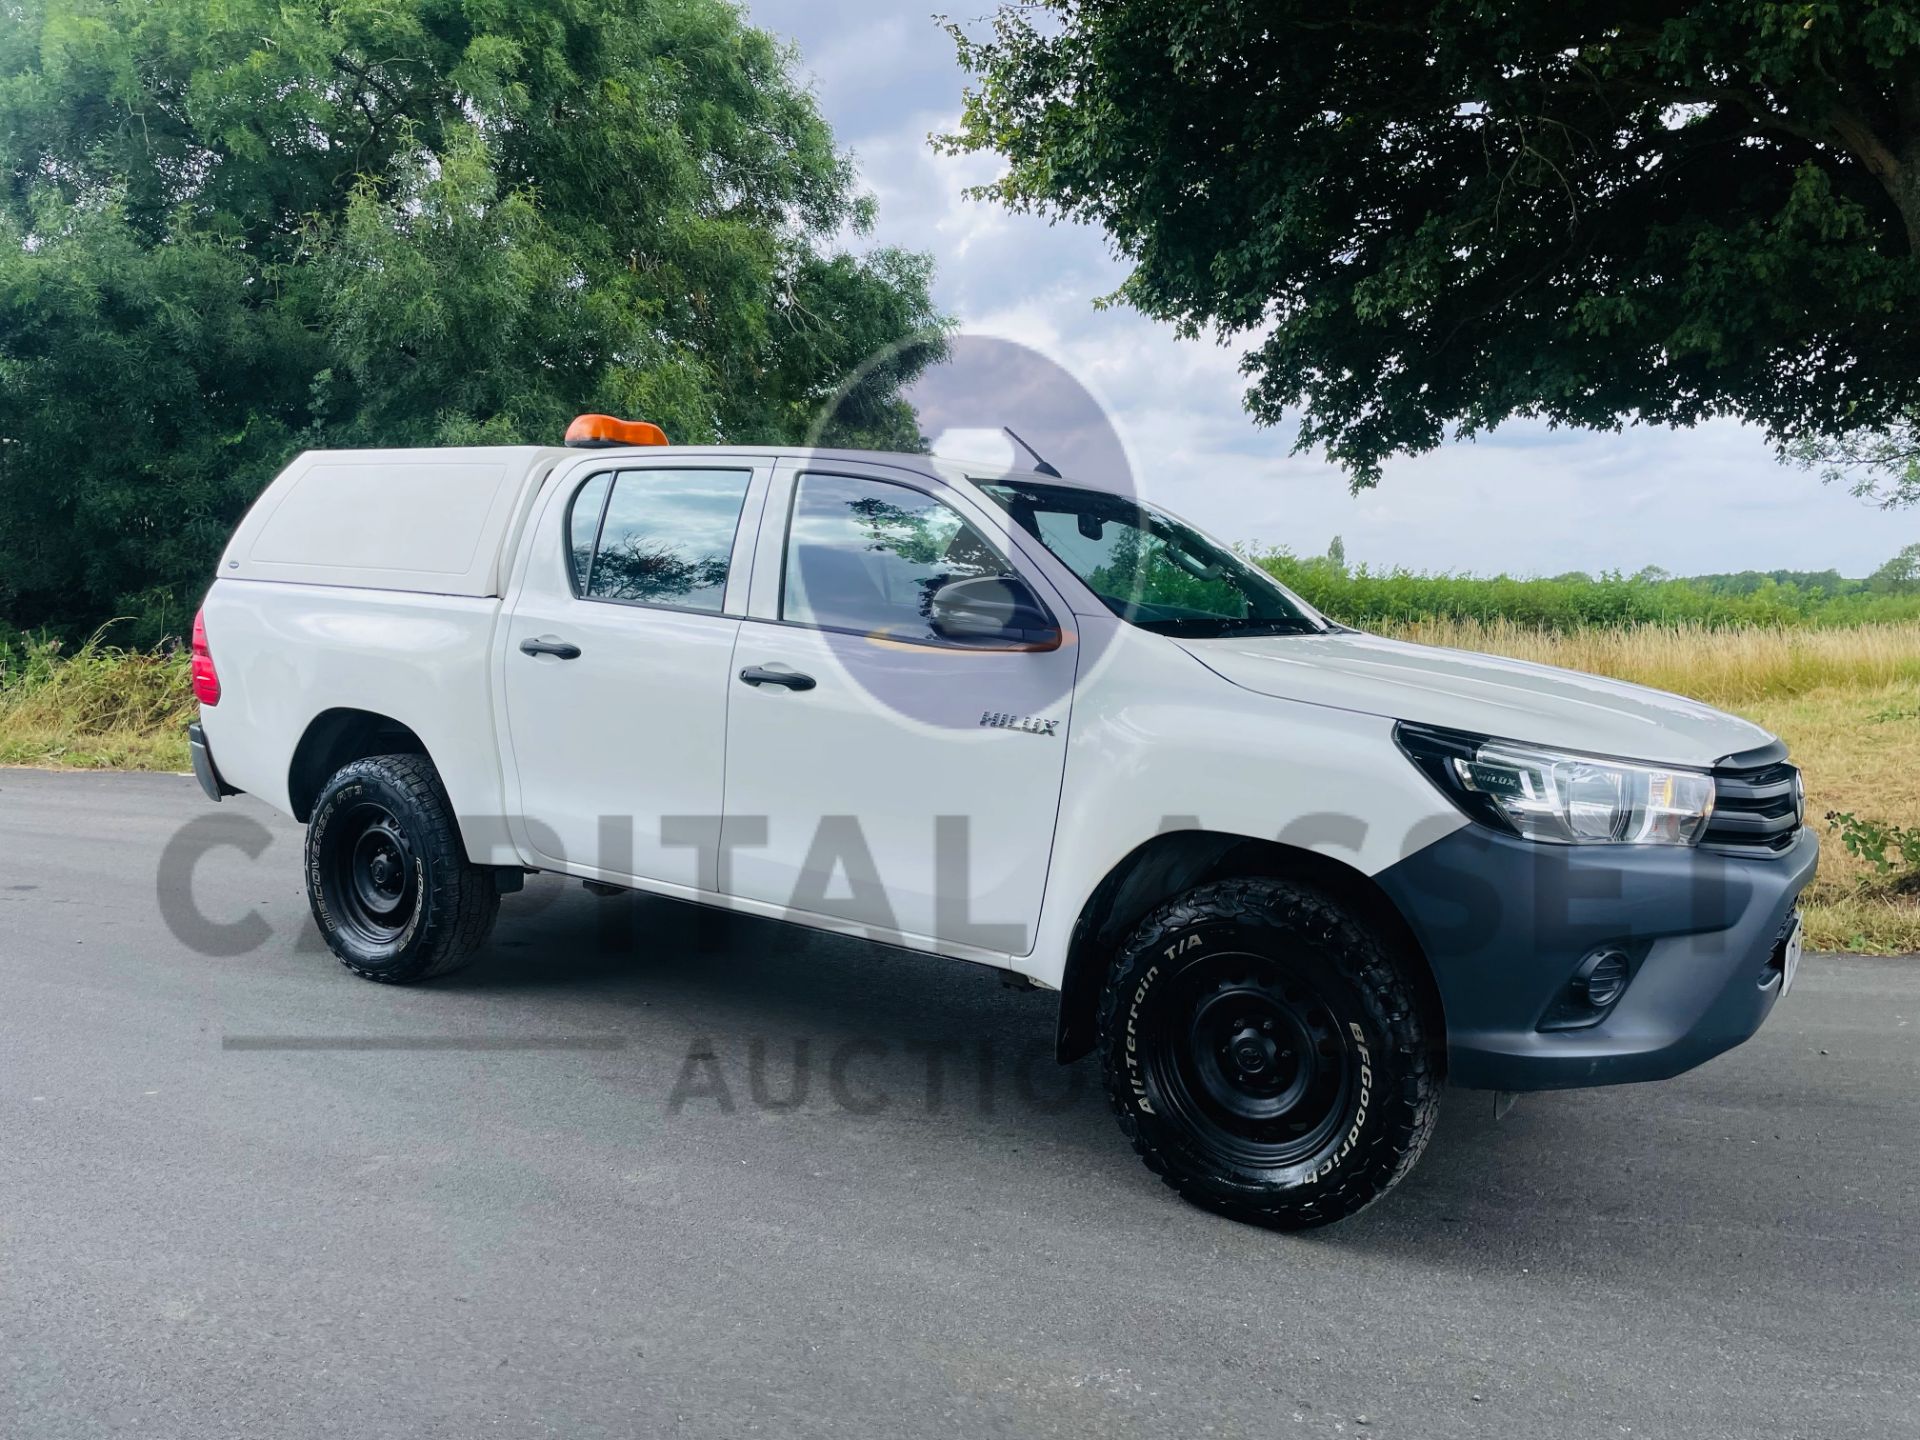 TOYOTA HILUX *DOUBLE CAB PICK-UP* (2018 - EURO 6) 2.4 D4-D - 6 SPEED (1 OWNER) *ULTRA LOW MILES* - Image 11 of 40